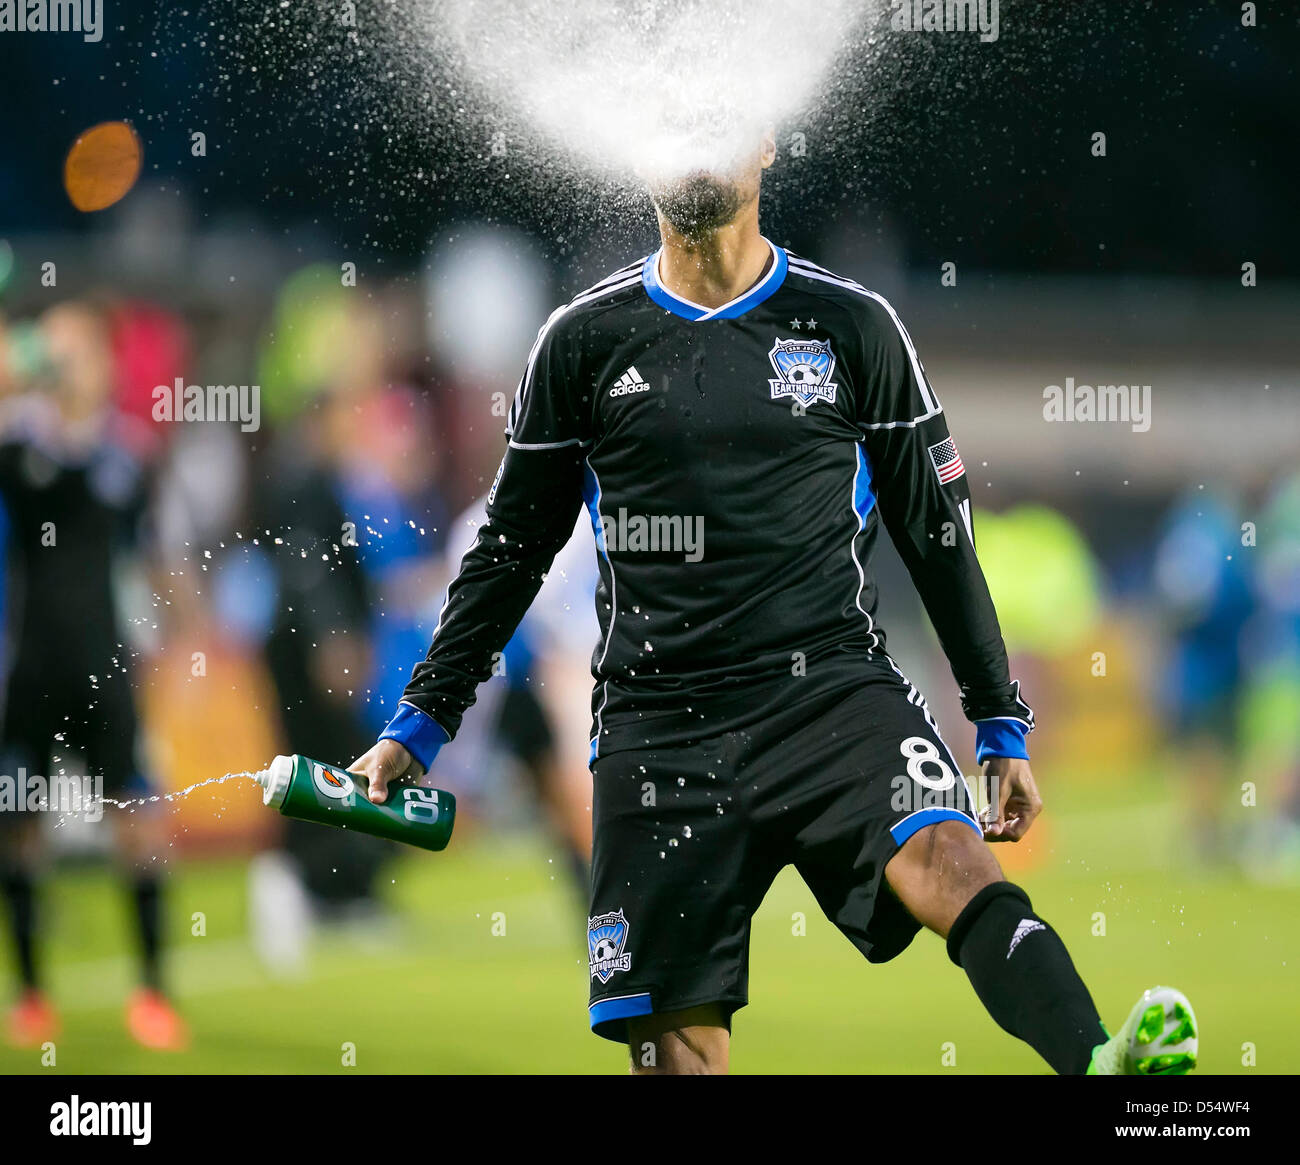 Santa Clara, California, USA. 23rd March 2013. San Jose Earthquakes forward Chris Wondolowski (8) spits out a spray of water just prior to the the MLS game between the Seattle Sounders and the San Jose Earthquakes at Buck Shaw Stadium in Santa Clara CA. San Jose defeated Seattle 1-0. Credit:  Cal Sport Media / Alamy Live News Stock Photo